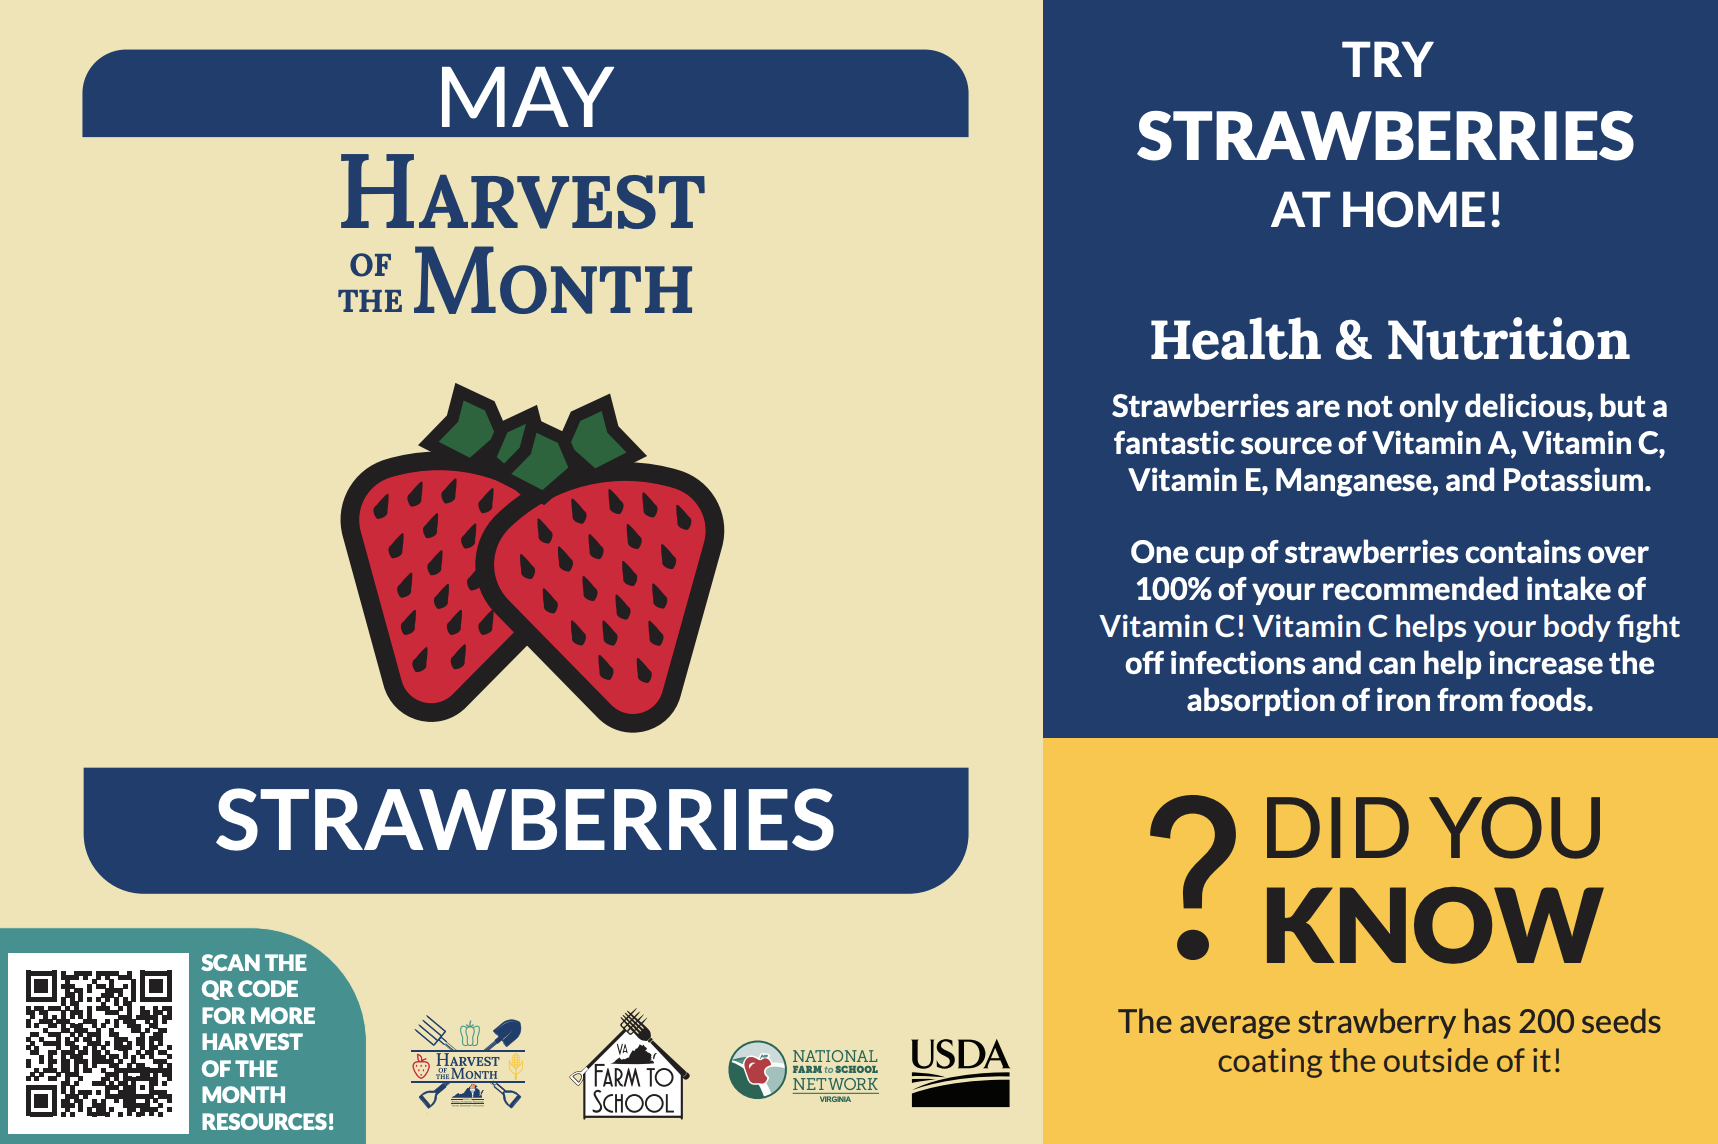 May Harvest of the Month - Strawberries